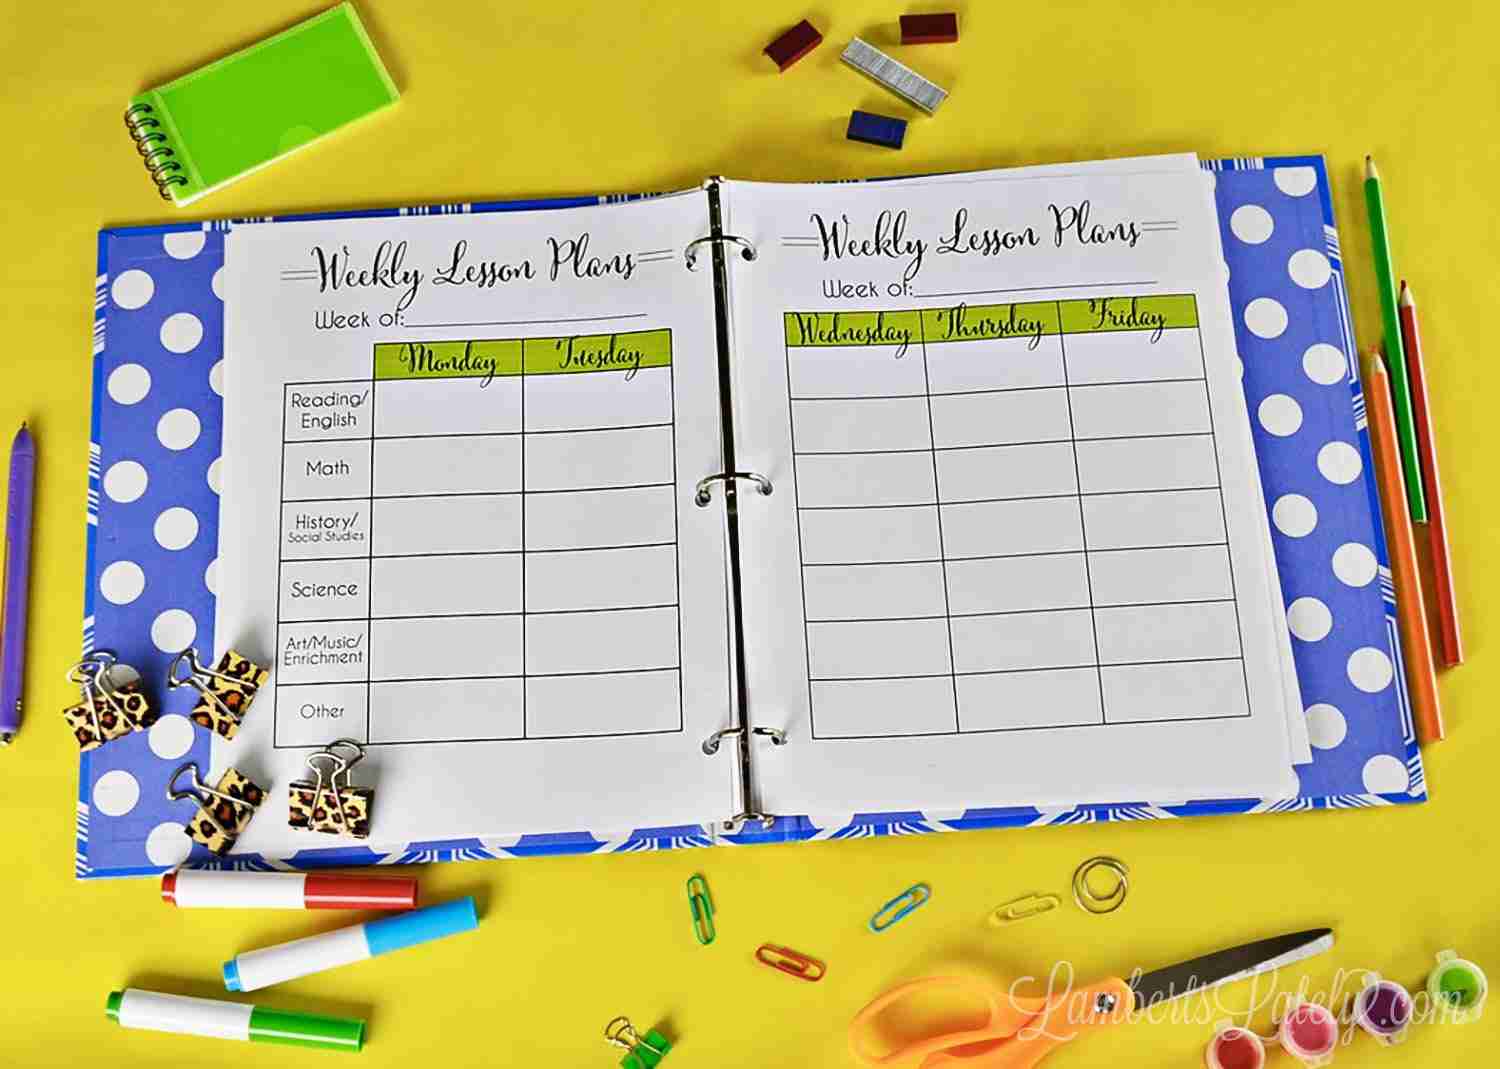 The Ultimate Teacher Planner is a set of free 2021-2022 teacher planner printables that has over 30 pages of calendars, lesson planning templates, binder covers, schedule planning (for elementary and high school), and more!